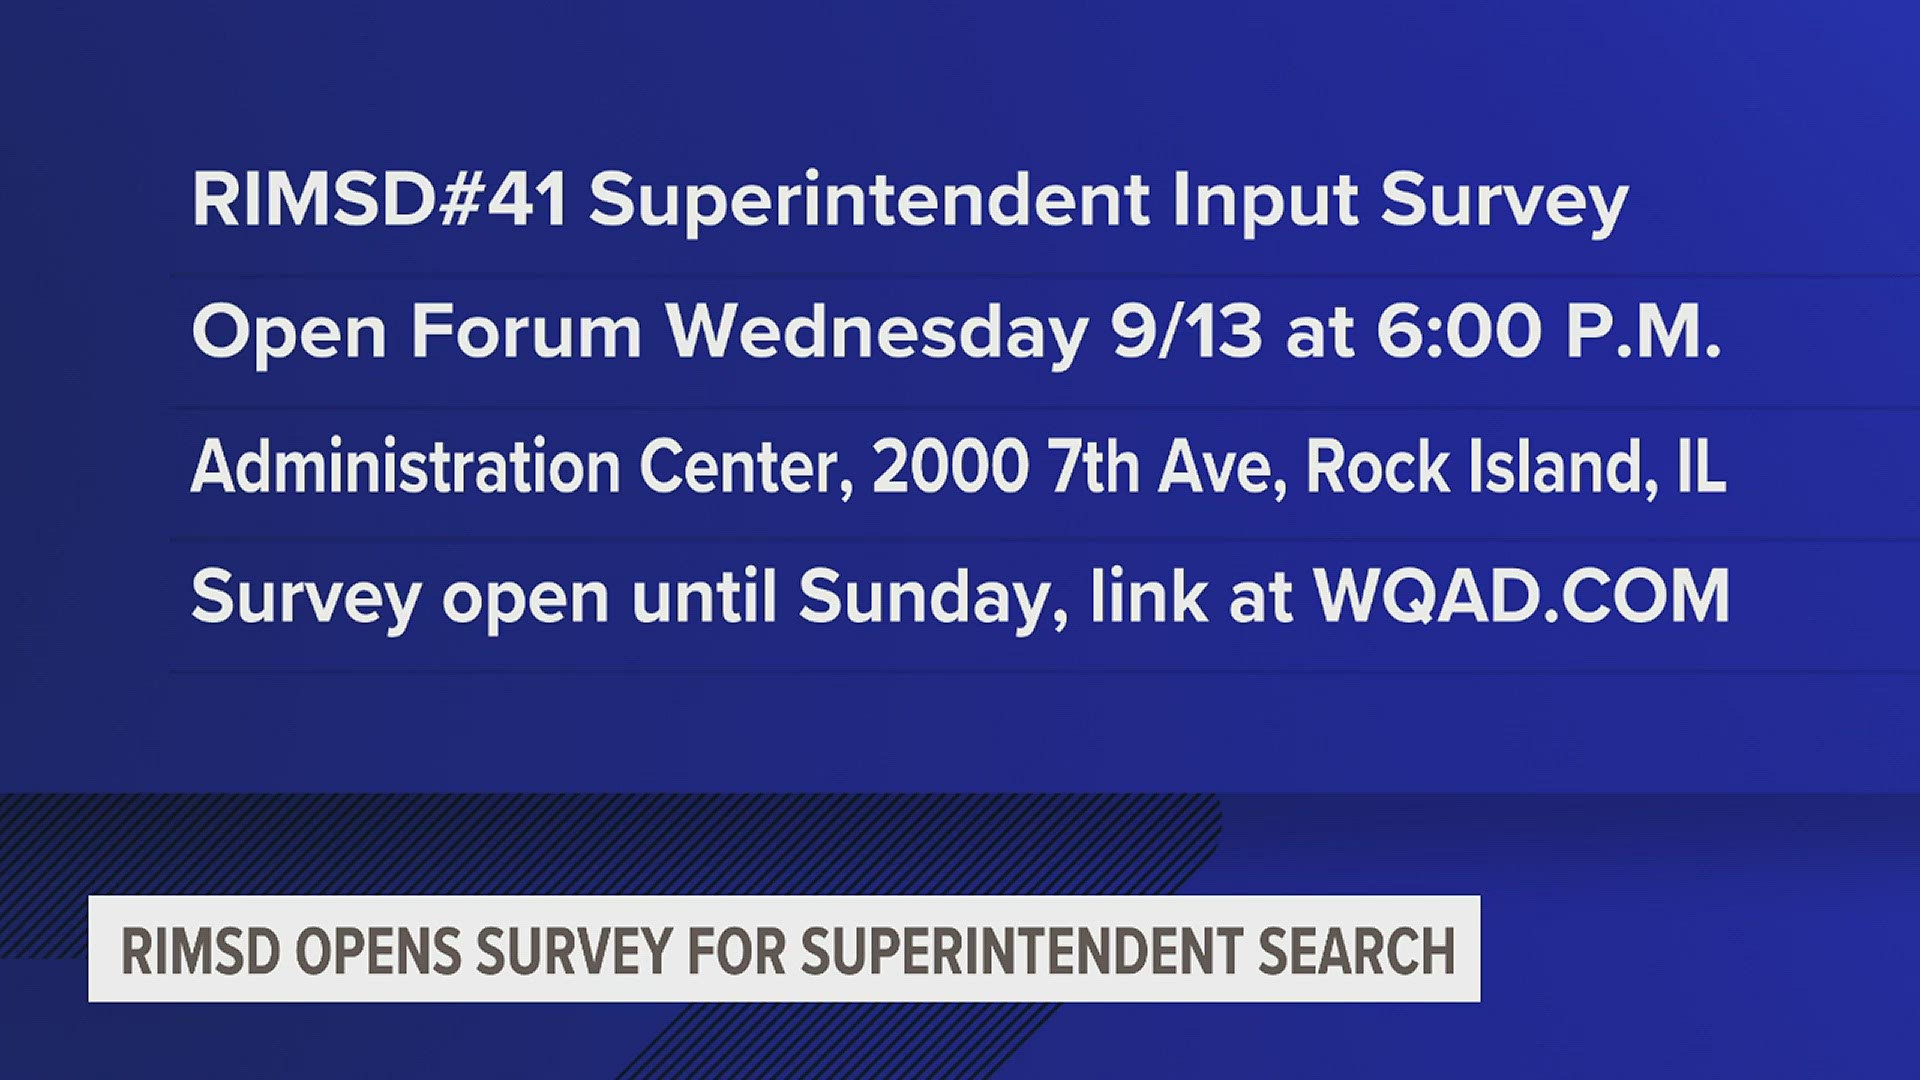 An open forum asking what community members want to see in the district's leader is also scheduled for Sept. 13 at 6 p.m.